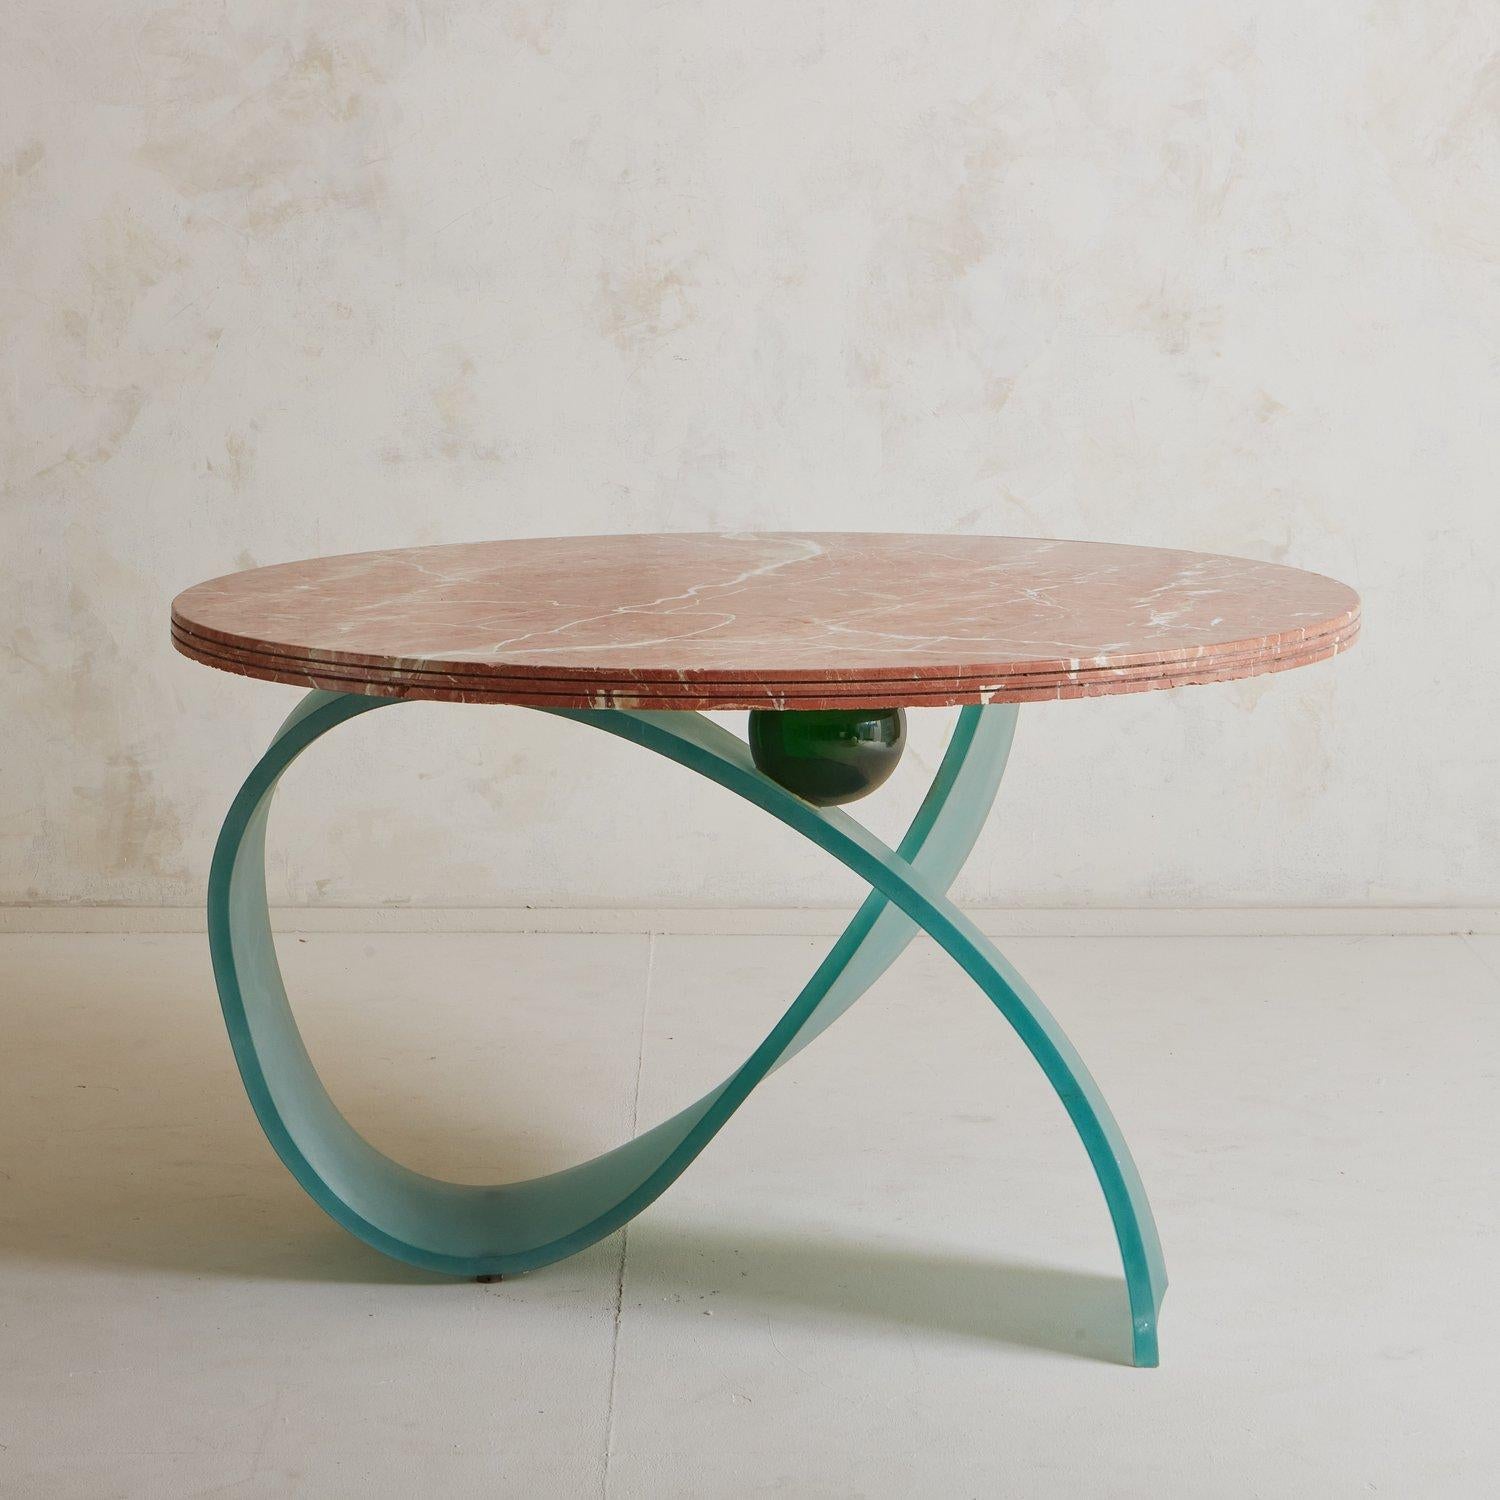 A vintage dining table with a round table top constructed with three layered blocks of Spanish Rojo Coralito marble featuring gorgeous cream and gray veining. This unique table has a sculptural blue frosted glass base with a green sphere detail.